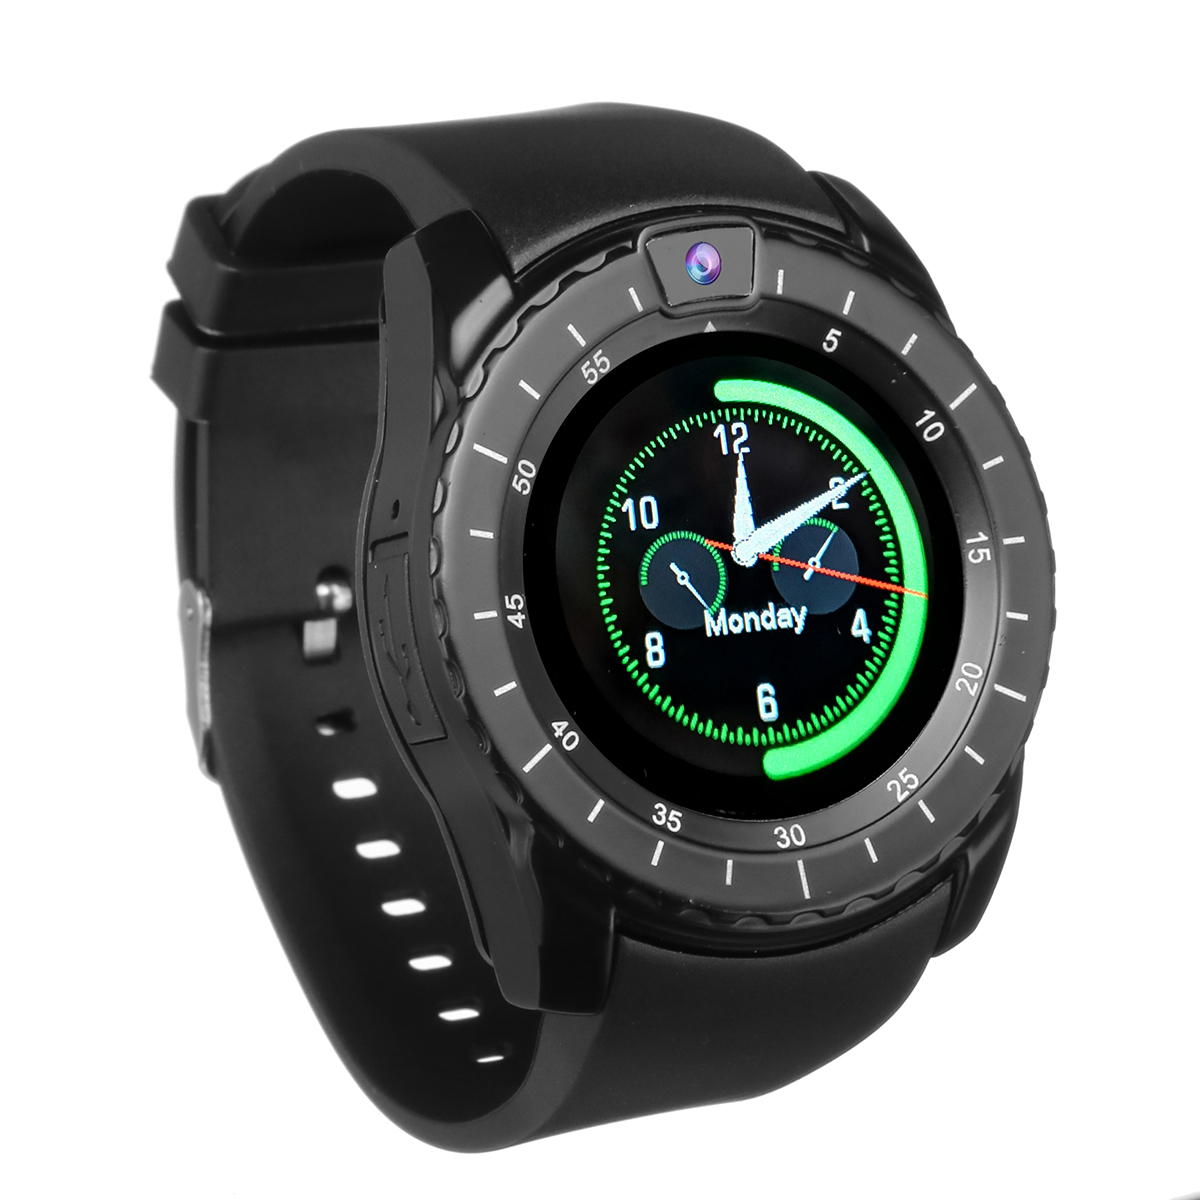 Bakeey-V8s-122-IPS-Curved-Screen-GSM-Watch-Phone-Sleep-Monitor-Music-Player-Remote-Camera-Smart-Watc-1477217